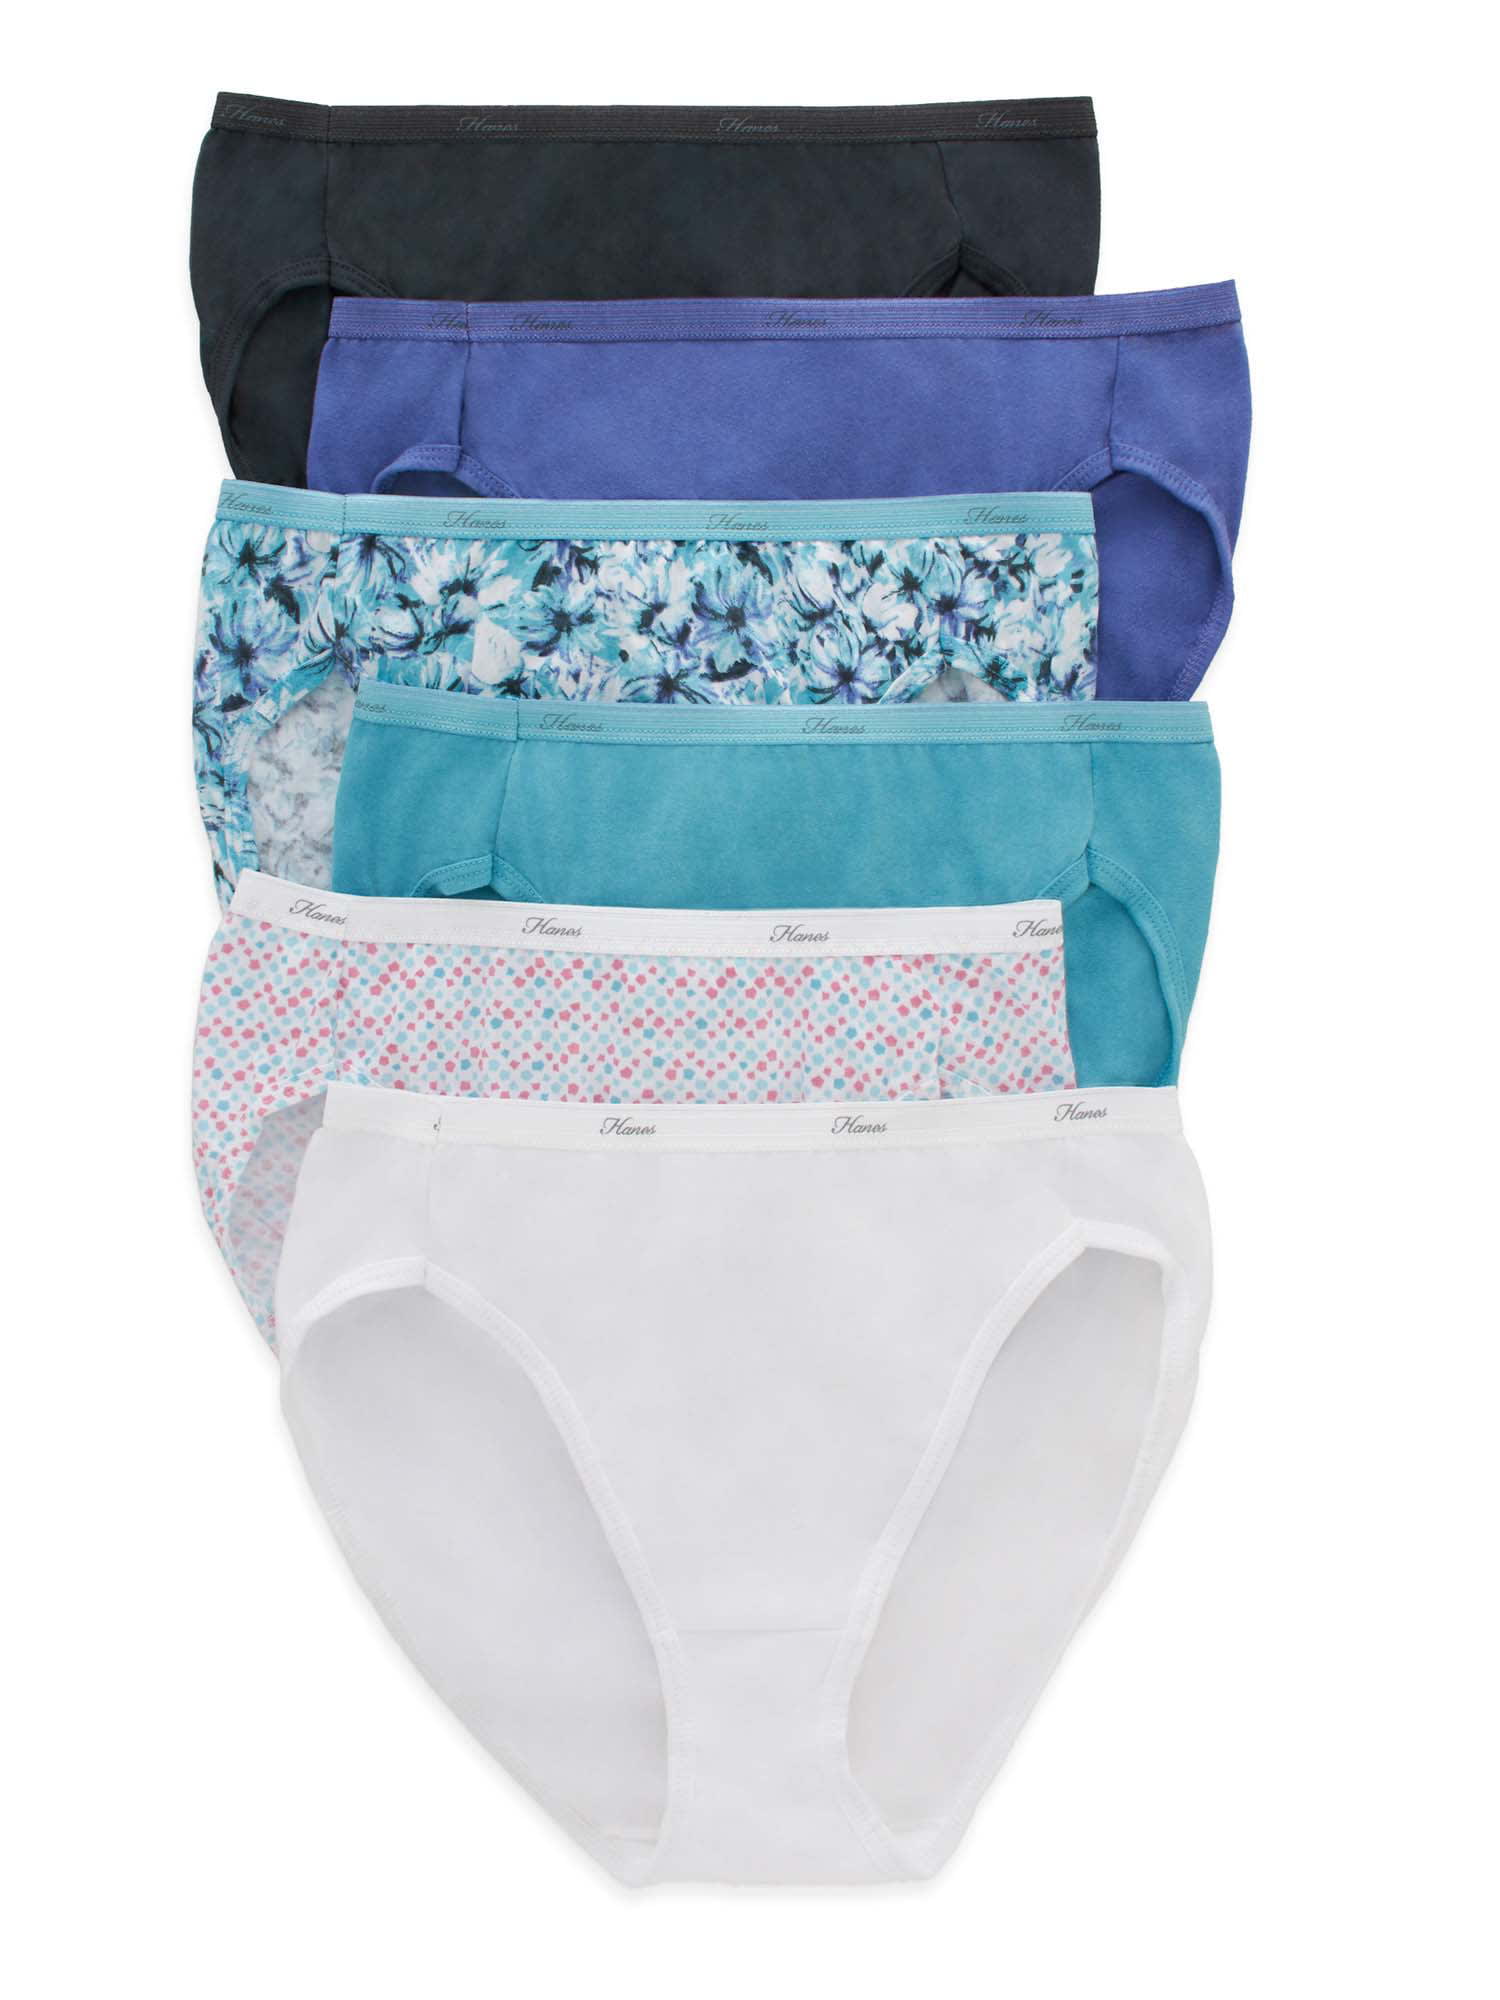 Fruit of the Loom Women's Brief Underwear, 10 Pack, Sizes M-3XL - DroneUp  Delivery